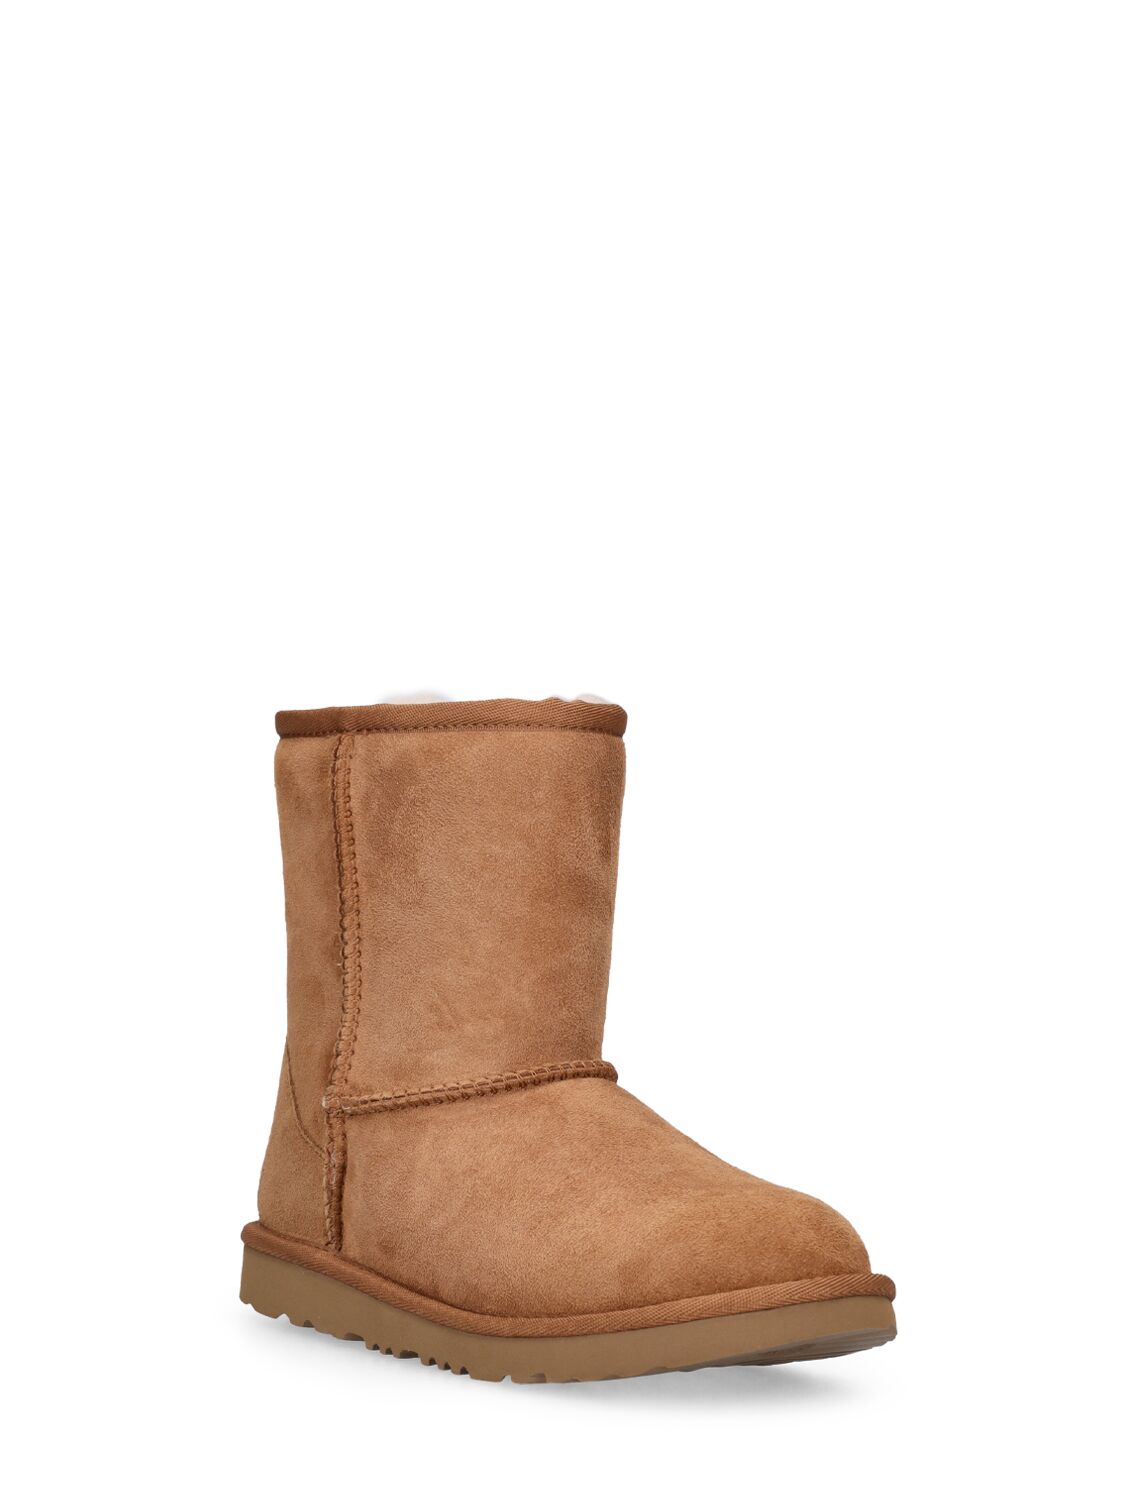 Shop Ugg Classic Ii Shearling Boots In Brown